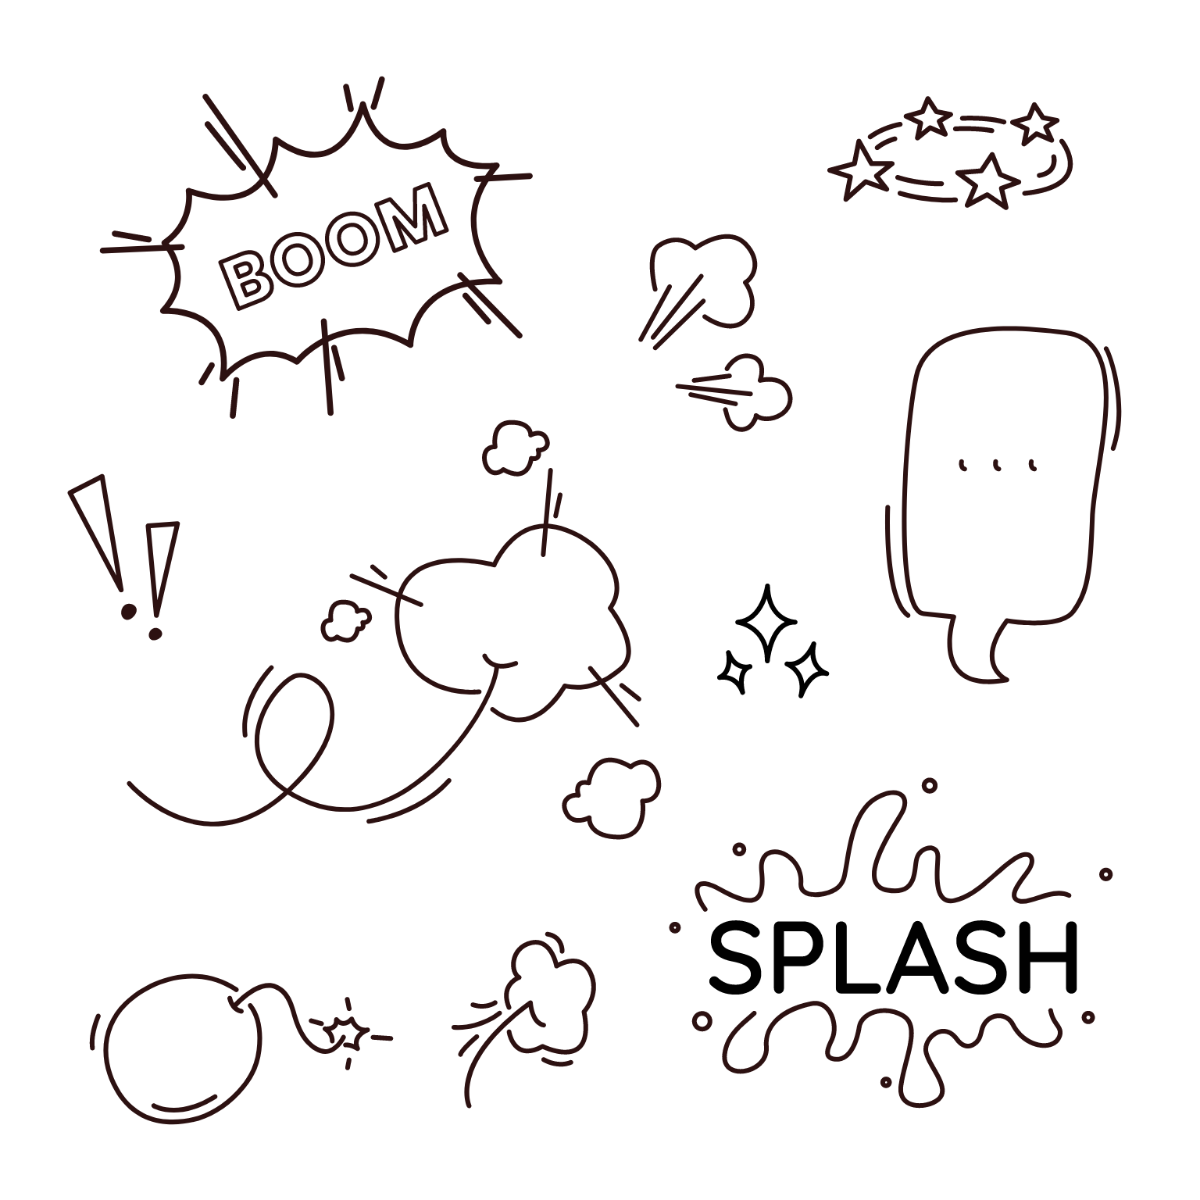 Free Comic Doodle Vector Template